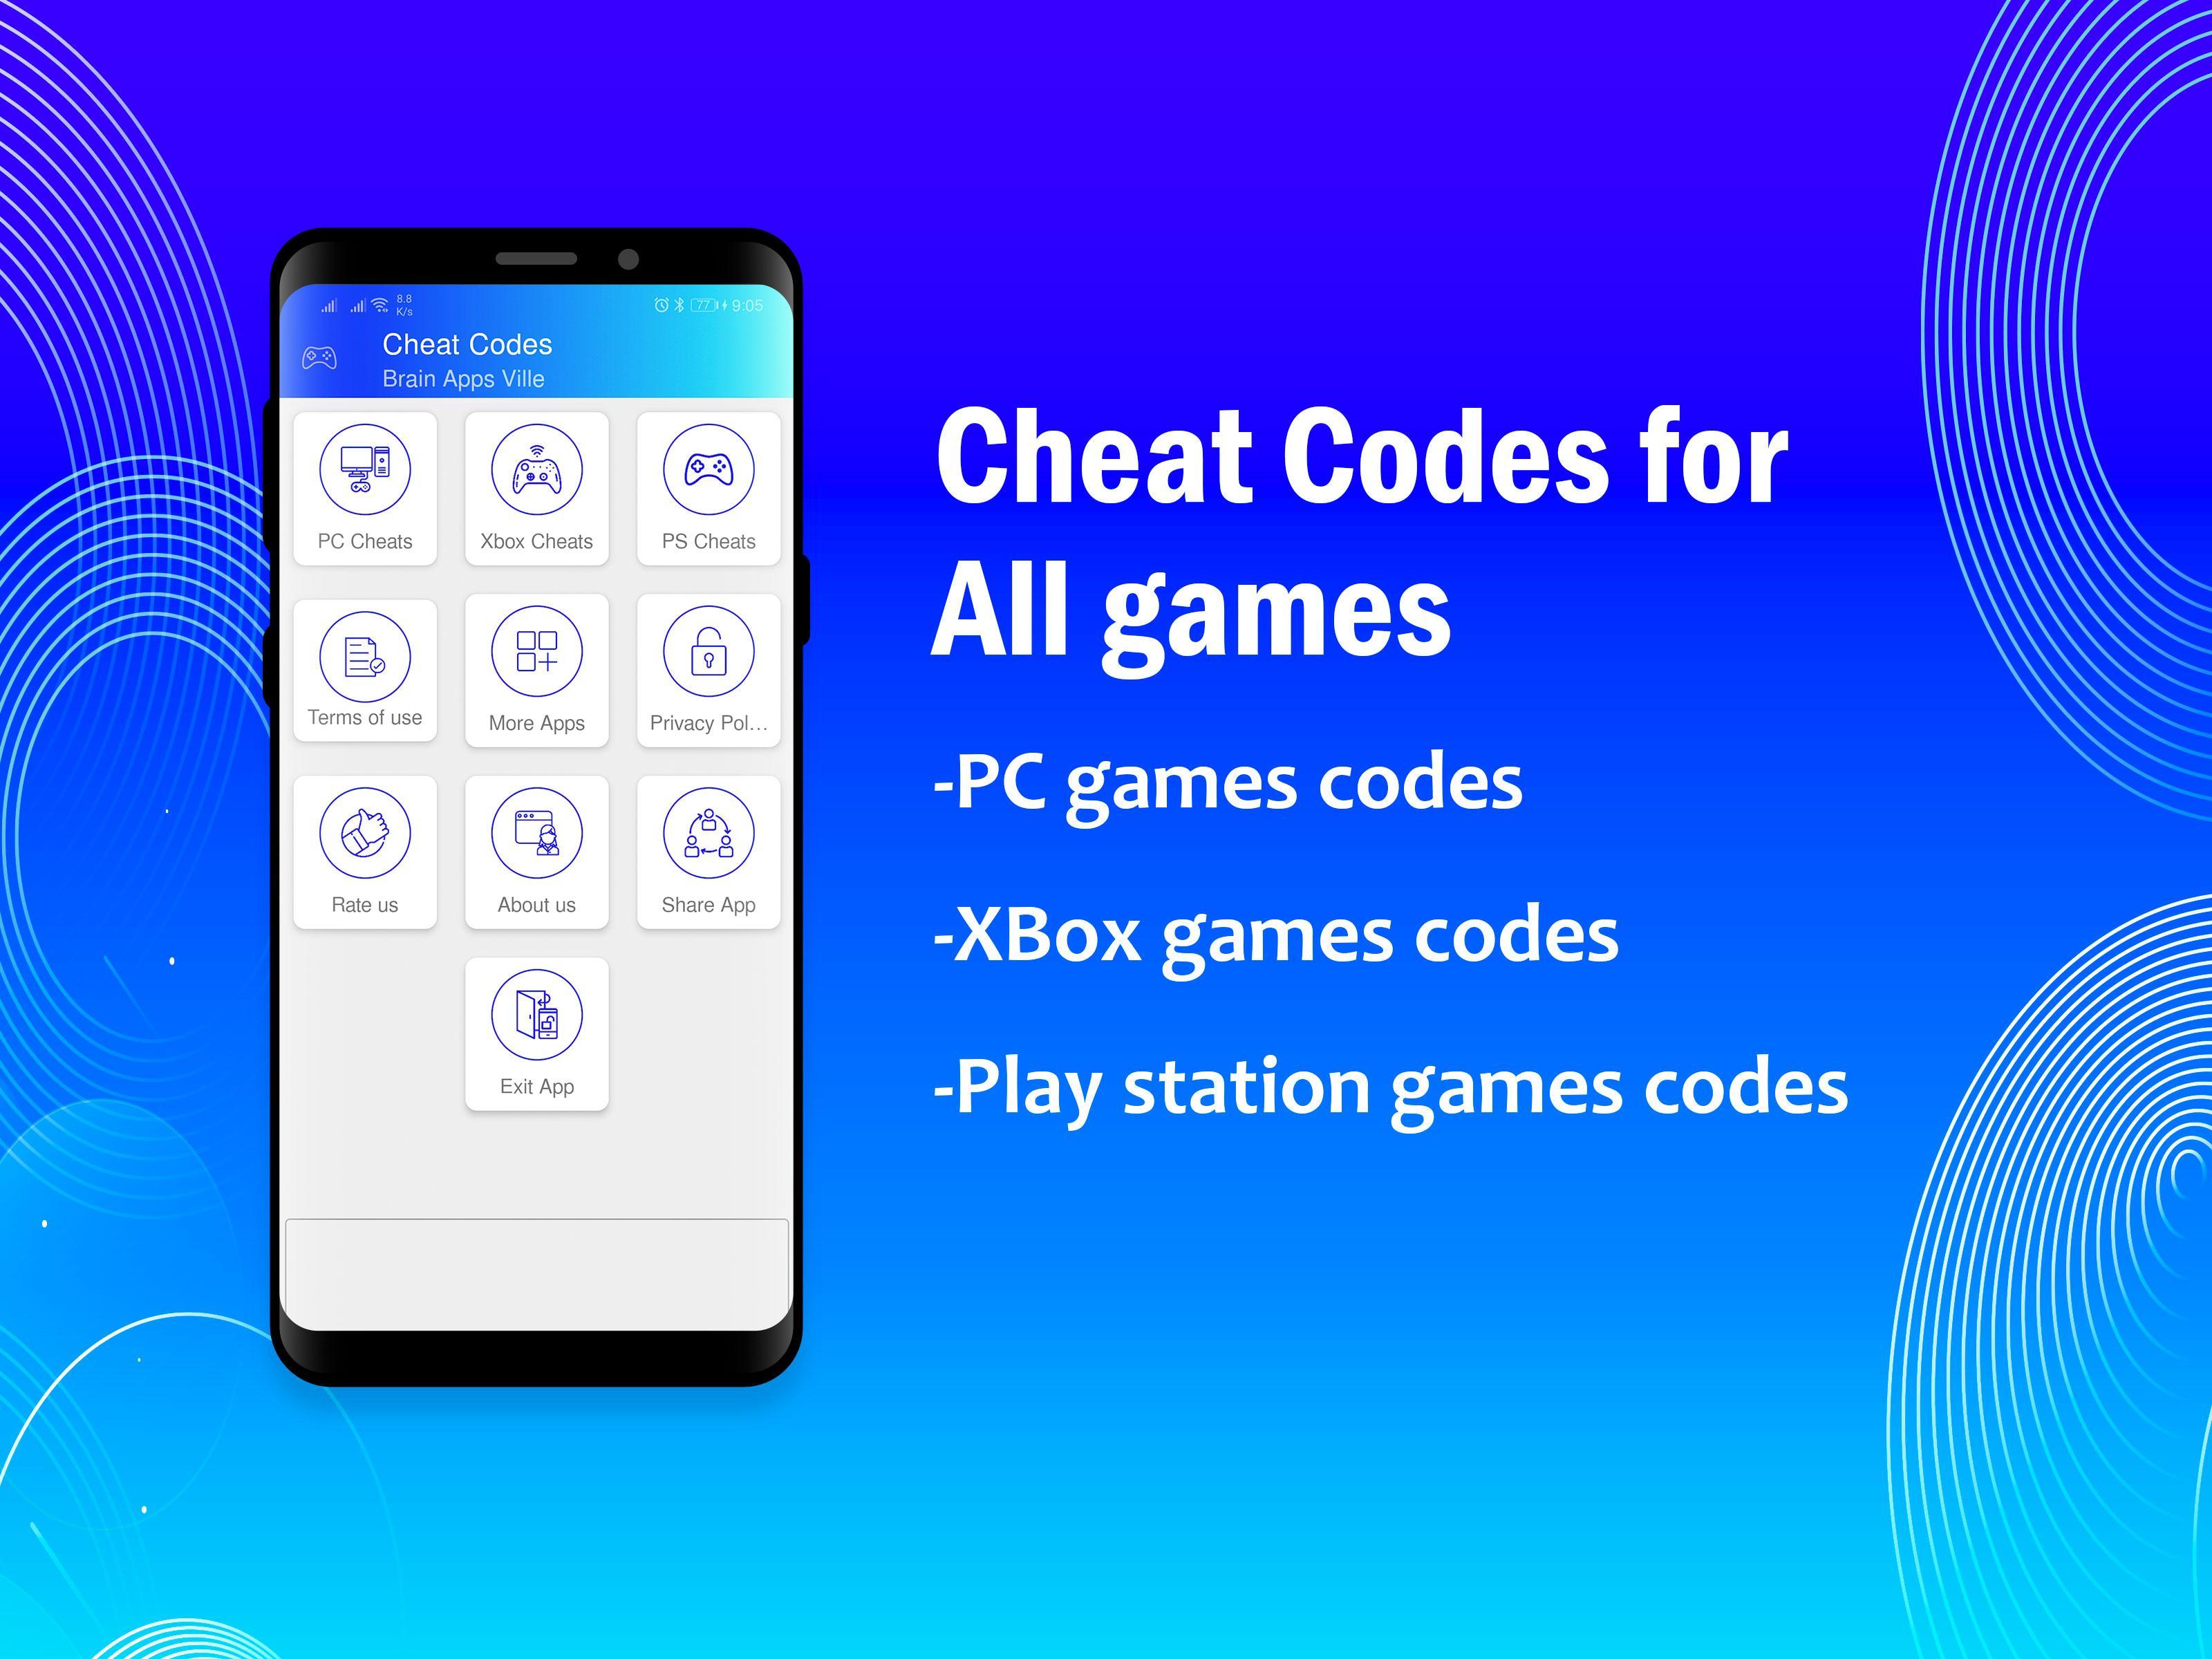 Cheats for games. Cheat codes. Android code. My games Cheats. Game one codes